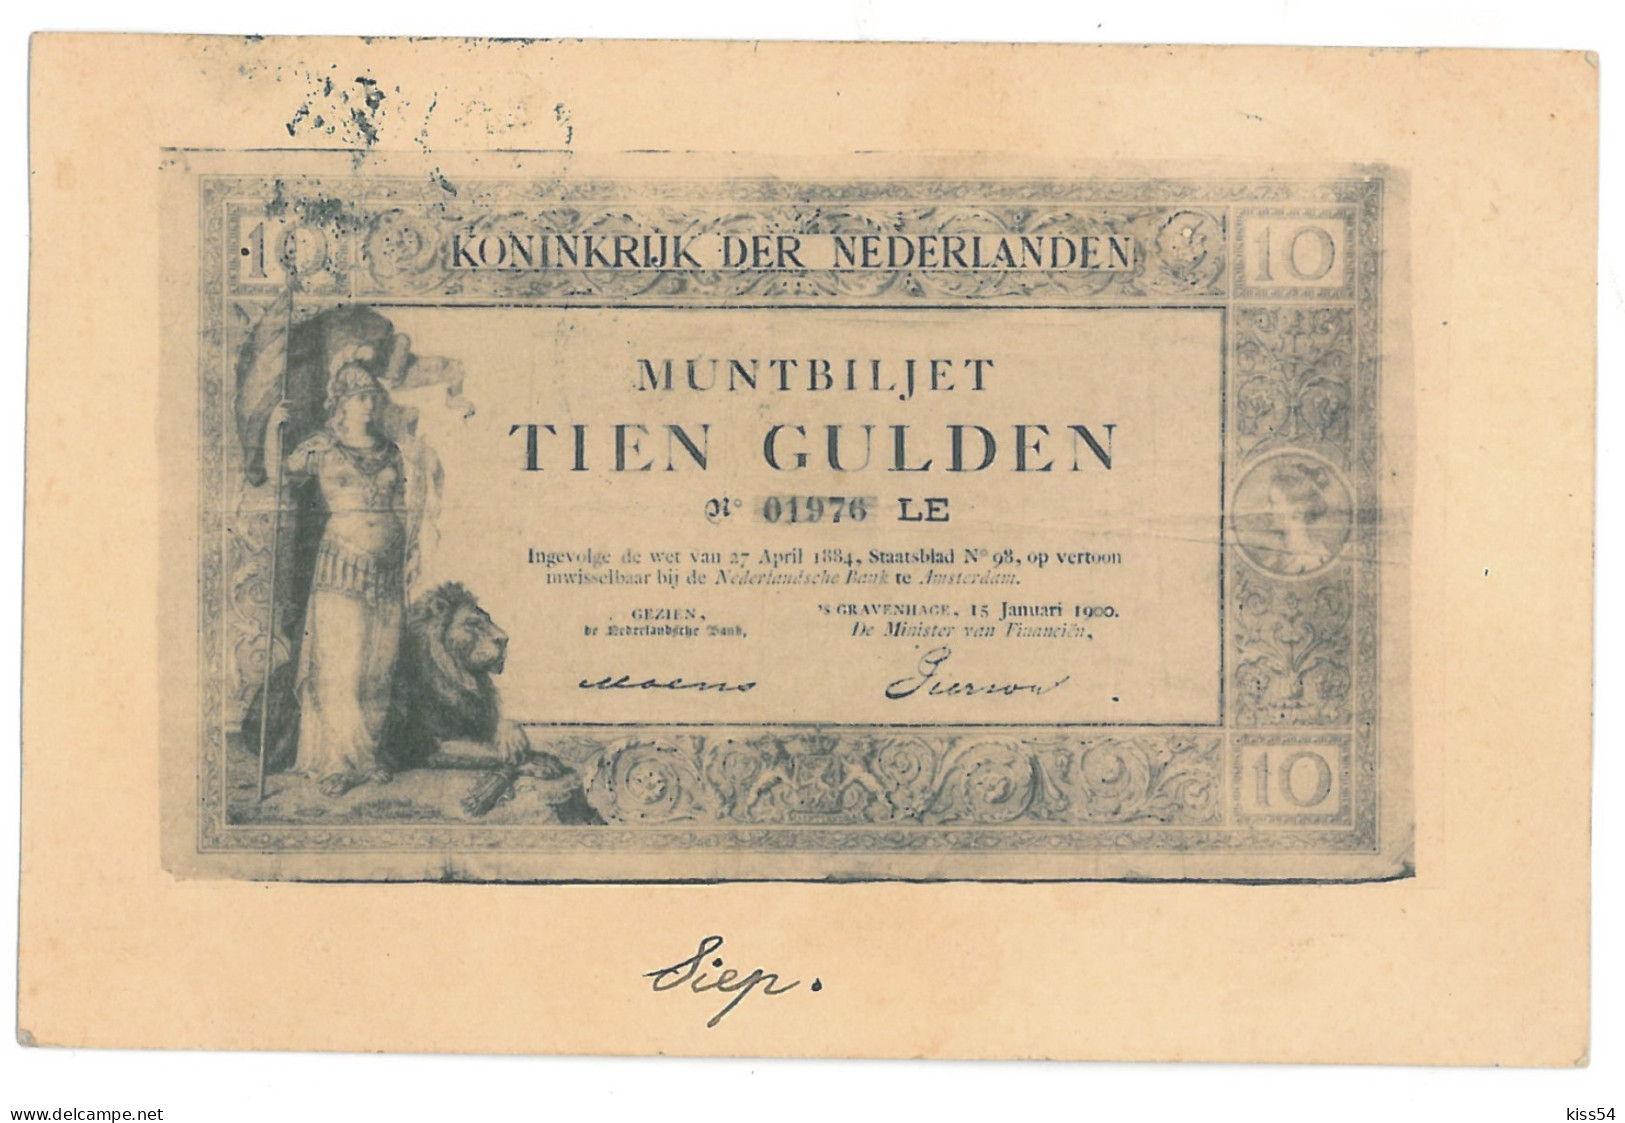 NED 4 - 12210 HOLLAND, Litho, Banknote 10 Gulden - Old Postcard - Used - 1902  - Monnaies (représentations)